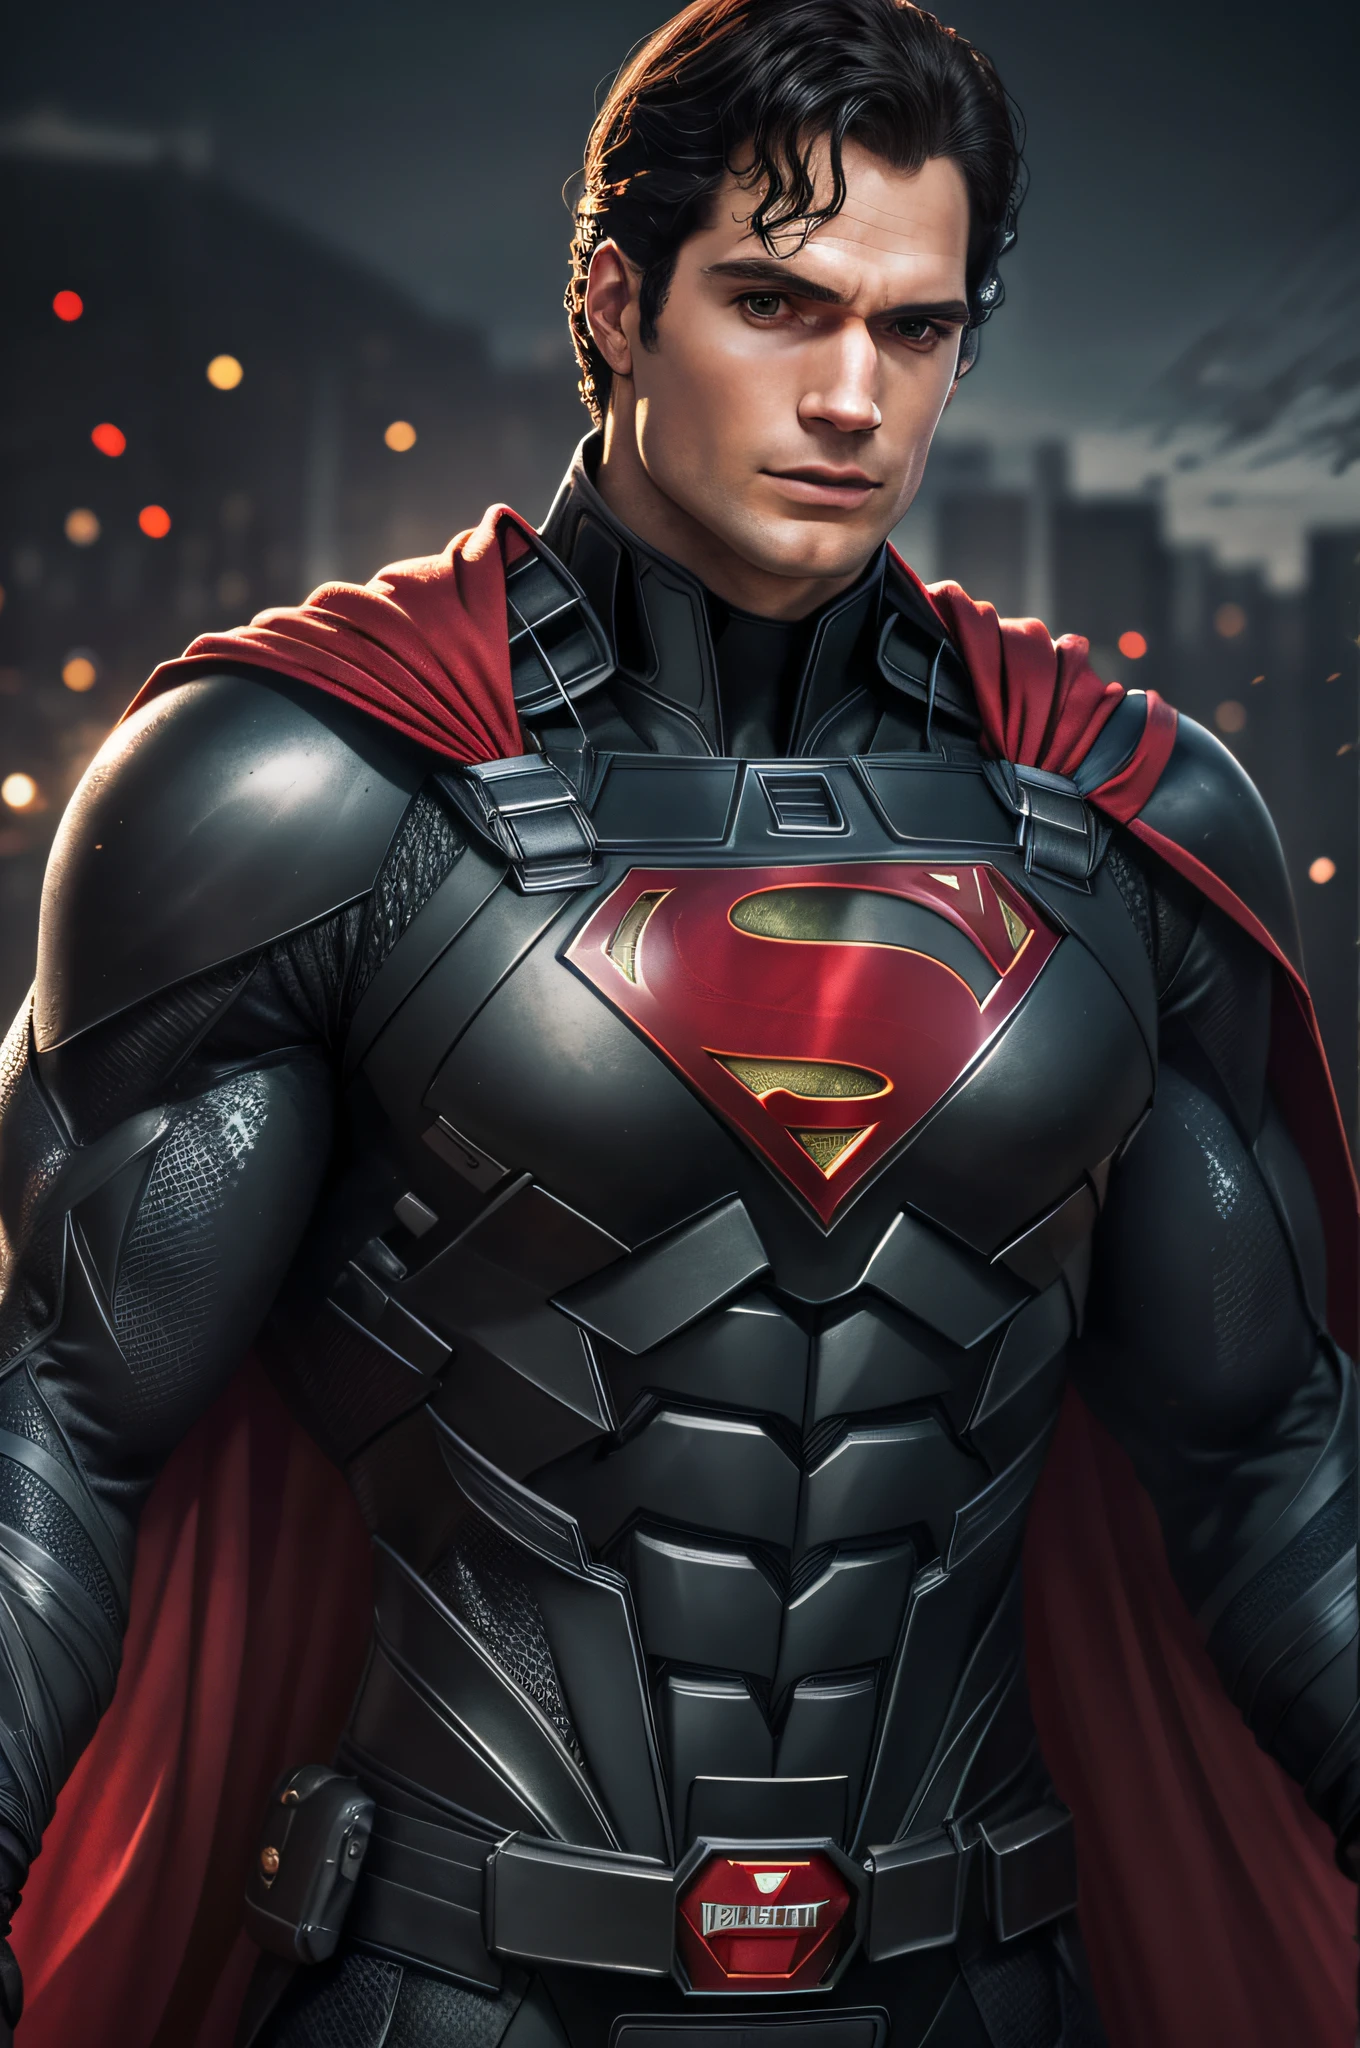 Henry Cavill as Superman, 40s year old, all black and red details suit, big S symbol on the chest, red cape, strain of hair covering forehead, short cut hair, tidy hair, tall, manly, hunk body, muscular, straight face, black hair, best quality, high resolution:1.2, masterpiece, raw photo, dark background, detailed suit, detailed face, upper body shot